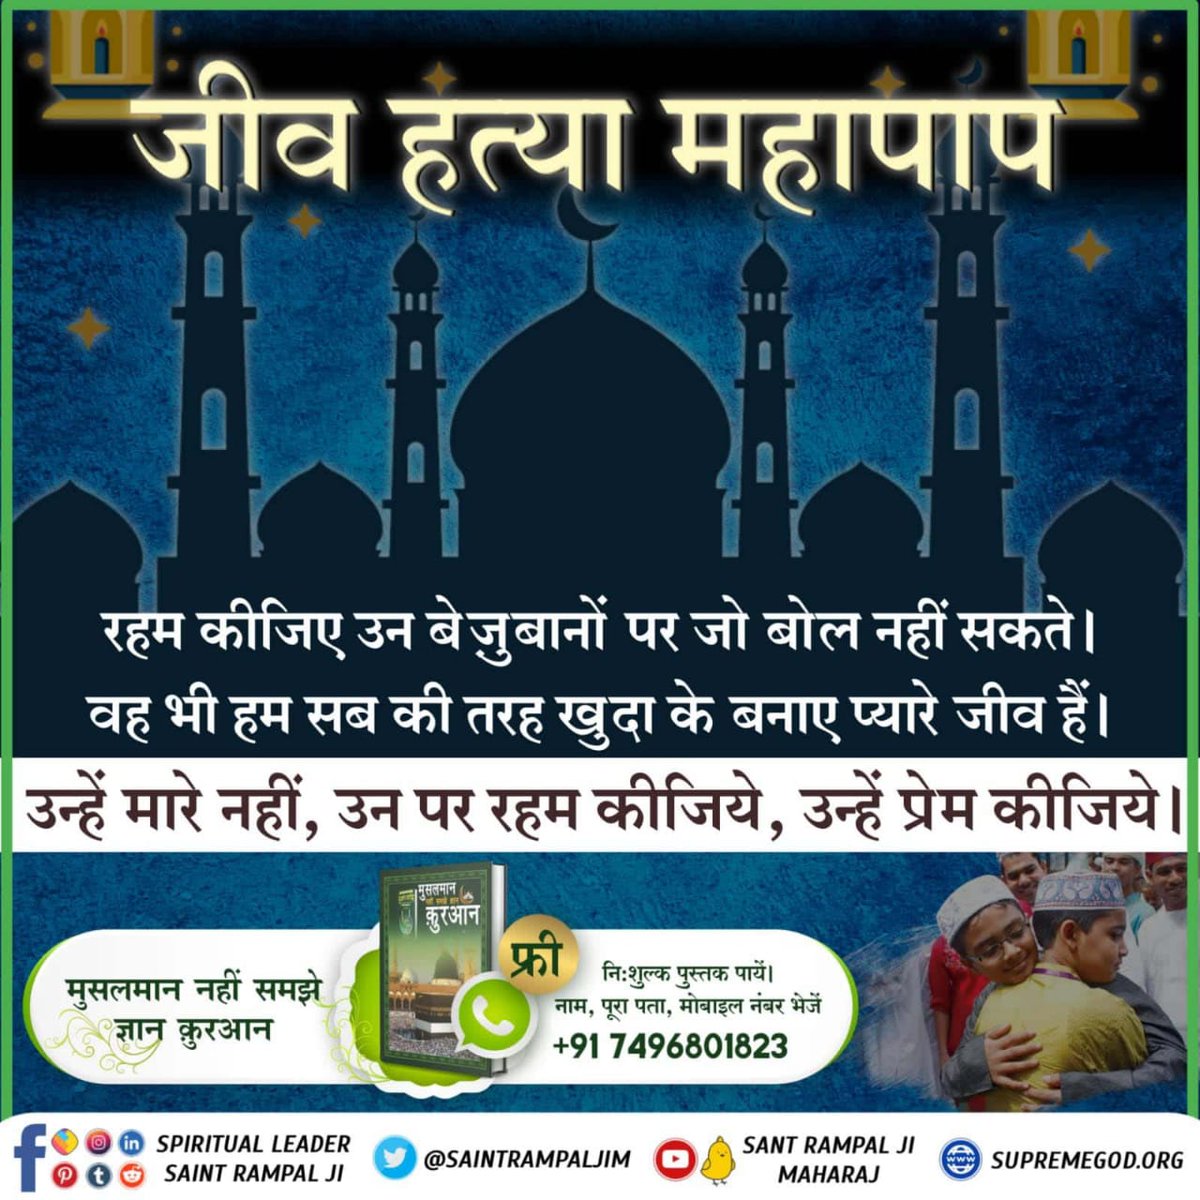 #ThoughtOfTheDay
Hazrat muhammad never ate meat why you guys eating meat #रहम_करो_मूक_जीवों_पर
Read👇🏻👇🏻👇🏻MushlmanNahiSmjheGyanQuran 
Or visit👇🏻👇🏻
Sant RampalJi YouTube Channel